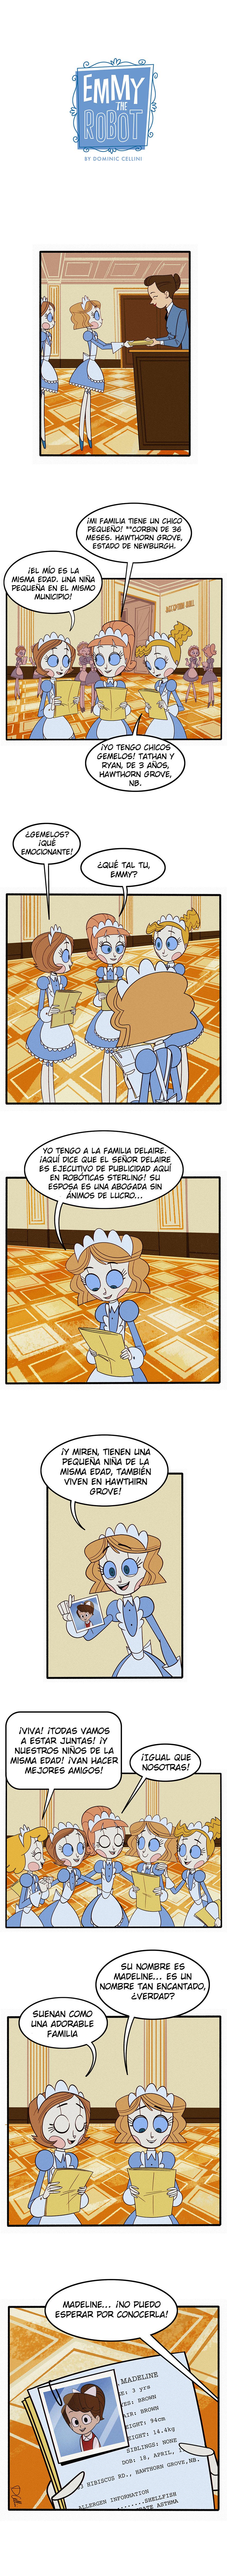 Emmy The Robot [Spanish] (Ongoing) 14